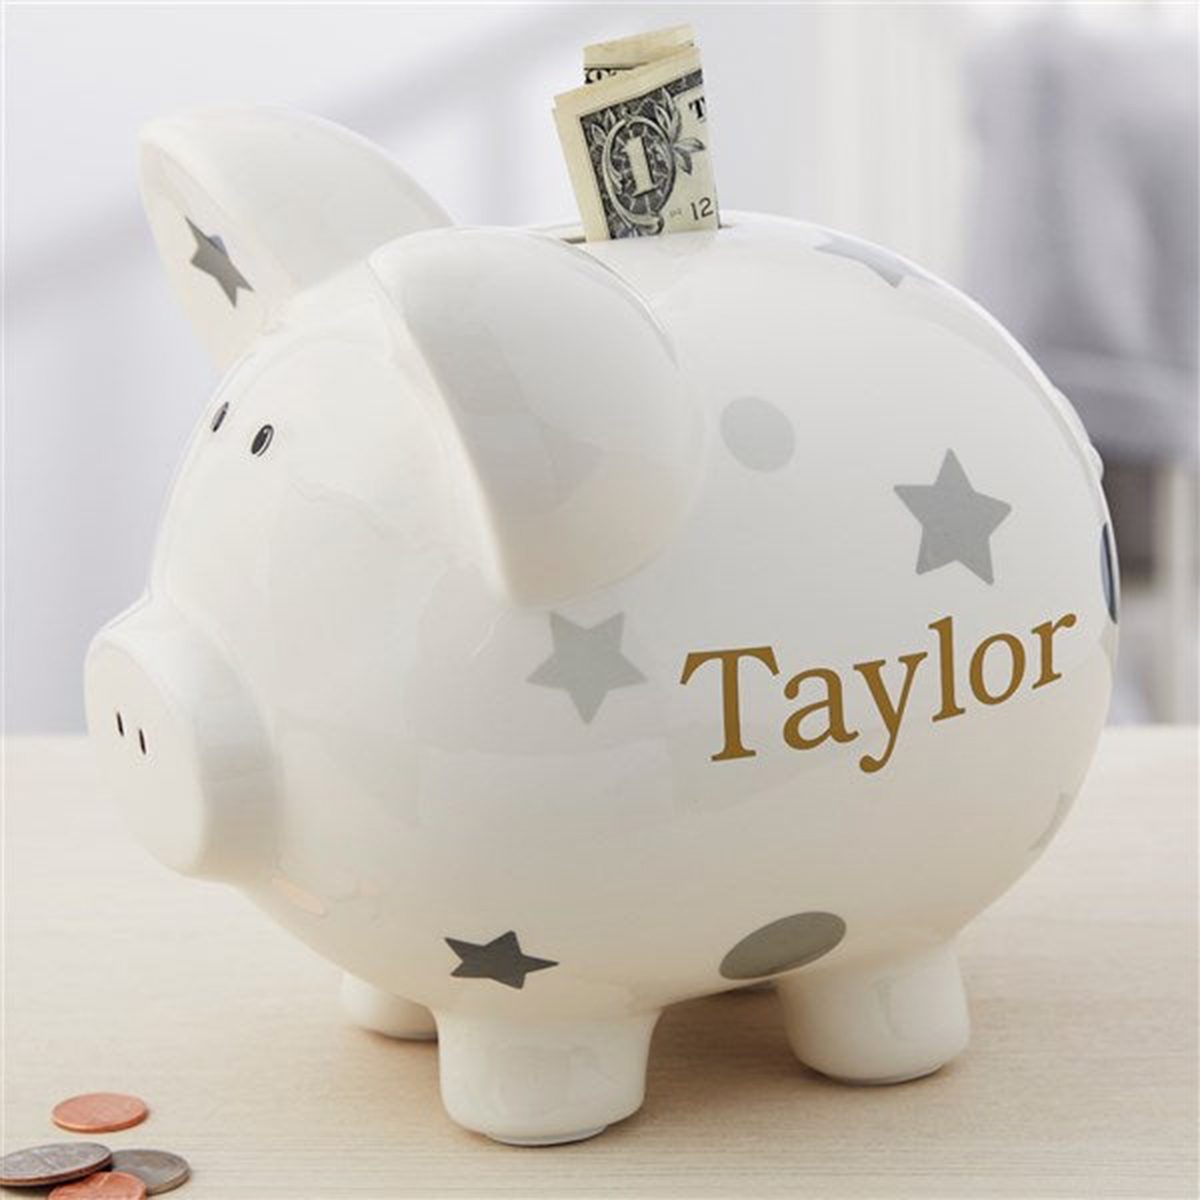 <p>It's never too early to start thinking about a baby's future. This <a href="https://www.personalizationmall.com/Personalized-Piggy-Bank-Grey-Polka-Dot-p22478.prod" rel="noopener noreferrer">ceramic piggy bank</a> comes in three colors and will be a welcome addition to any nursery. Consider adding a few dollars to help get them started. After all, saving money is one of the <a href="https://www.rd.com/list/pay-for-college-without-loans/" rel="noopener noreferrer">best ways to avoid student loans</a>.</p> <p class="listicle-page__cta-button-shop"><a class="shop-btn" href="https://www.personalizationmall.com/Personalized-Piggy-Bank-Grey-Polka-Dot-p22478.prod">Shop Now</a></p>